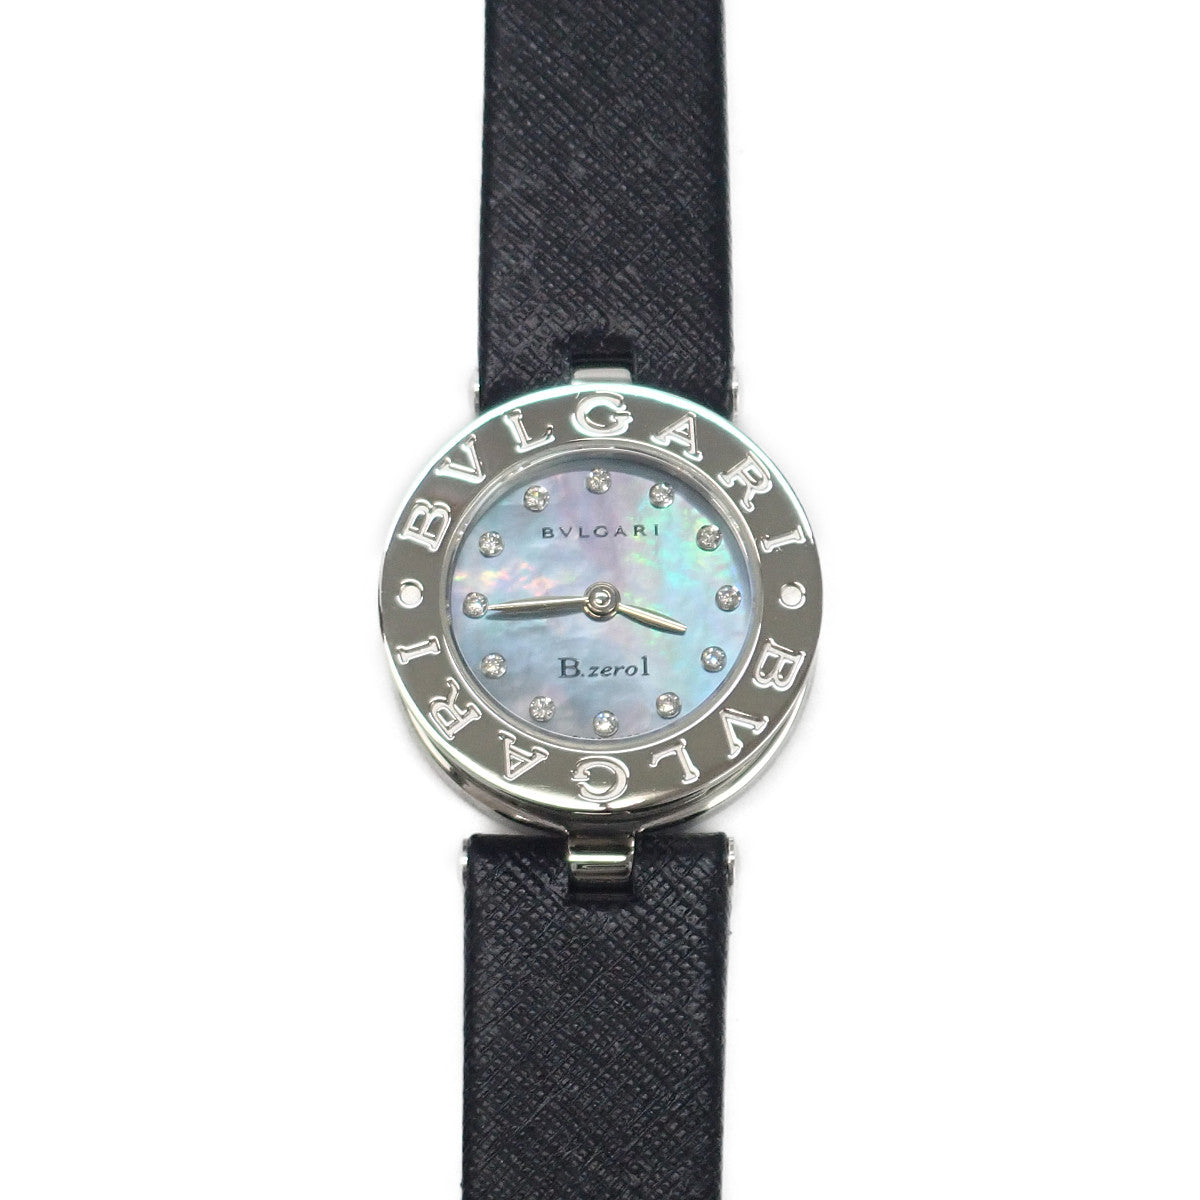 Bvlgari  Bulgari Women's B-zero1 Watch BZ22S with Blue Shell Dial and 12P Diamond, Black Leather Strap (Pre-owned) BZ22BSL/12 in Excellent condition